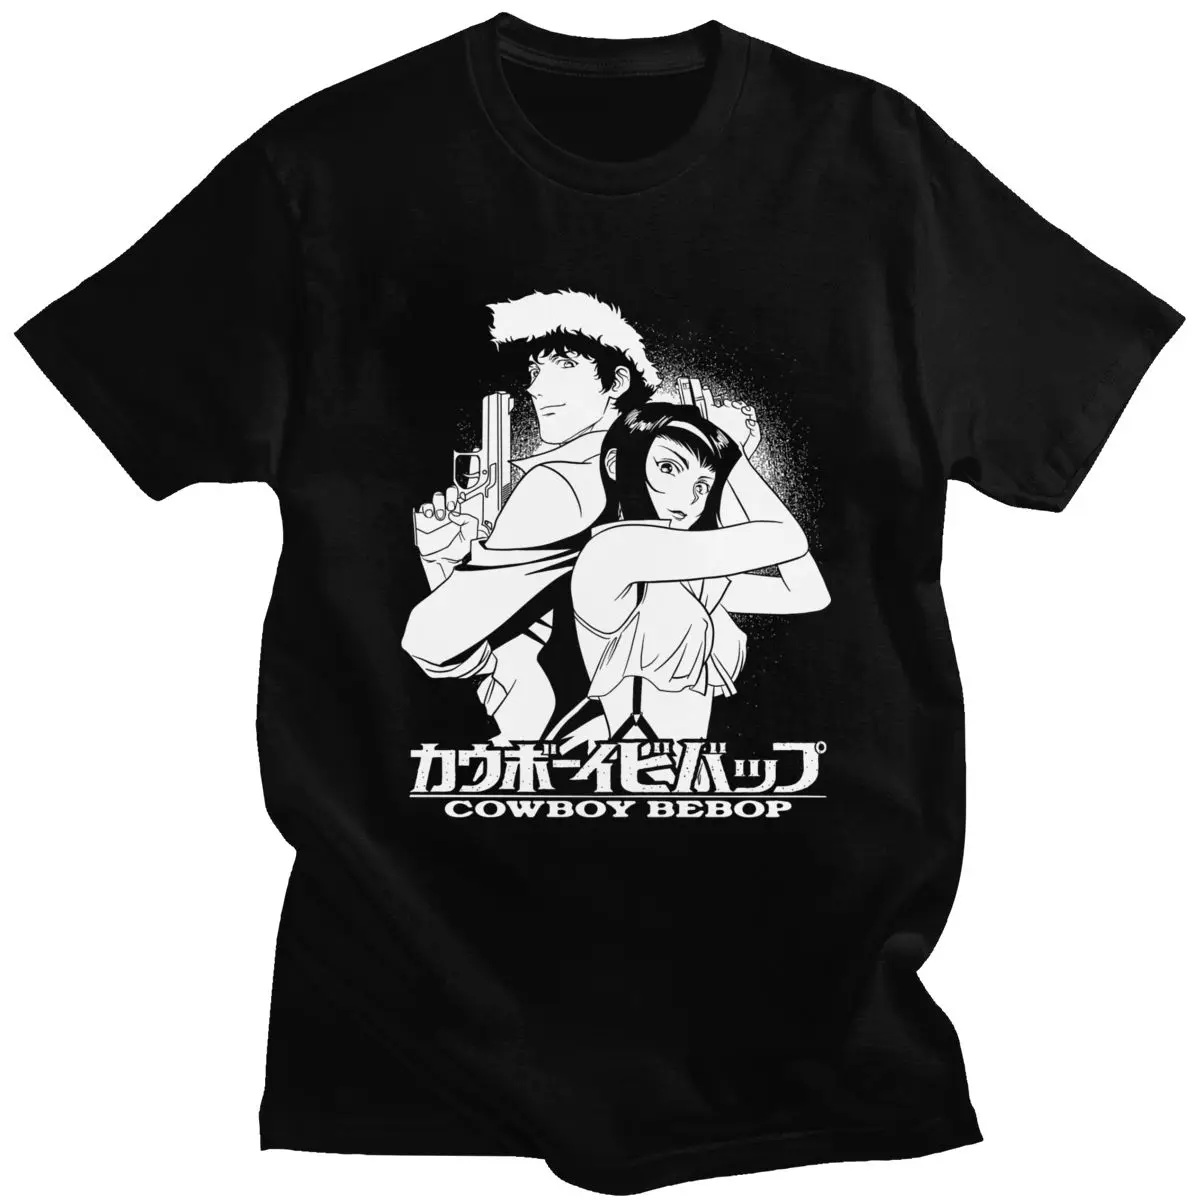 

Novelty Men's Animated Tv Show Cowboy Bebop T Shirts Short Sleeves Cotton T-shirt Leisure Manga Spike Spiegel and Faye Tee Gift